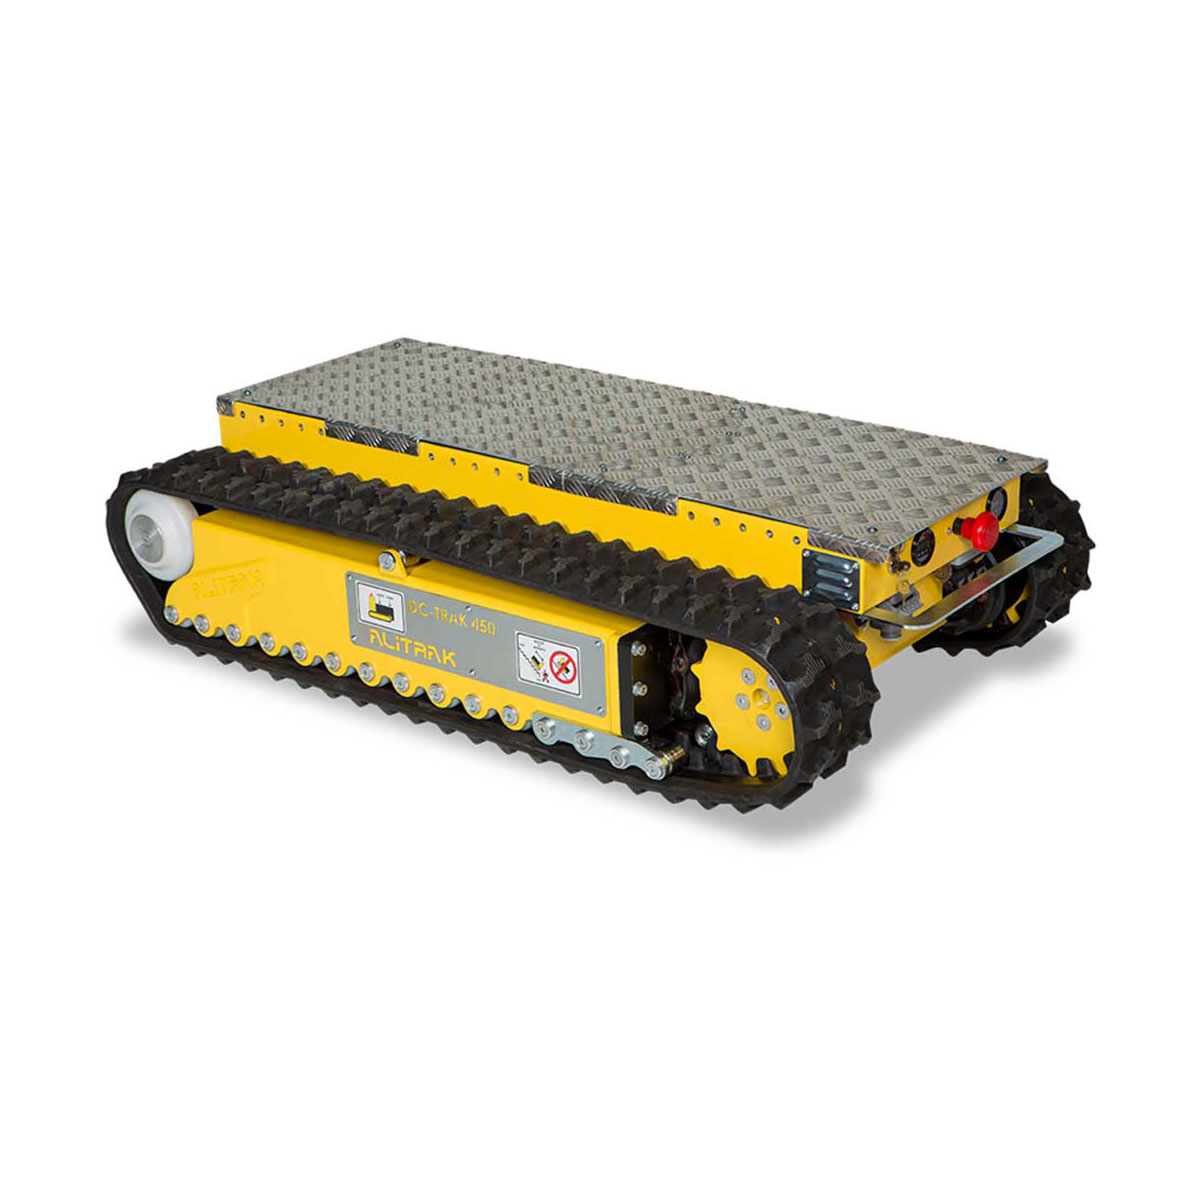 Buy Electric Transporter - Remote available at Astrolift NZ